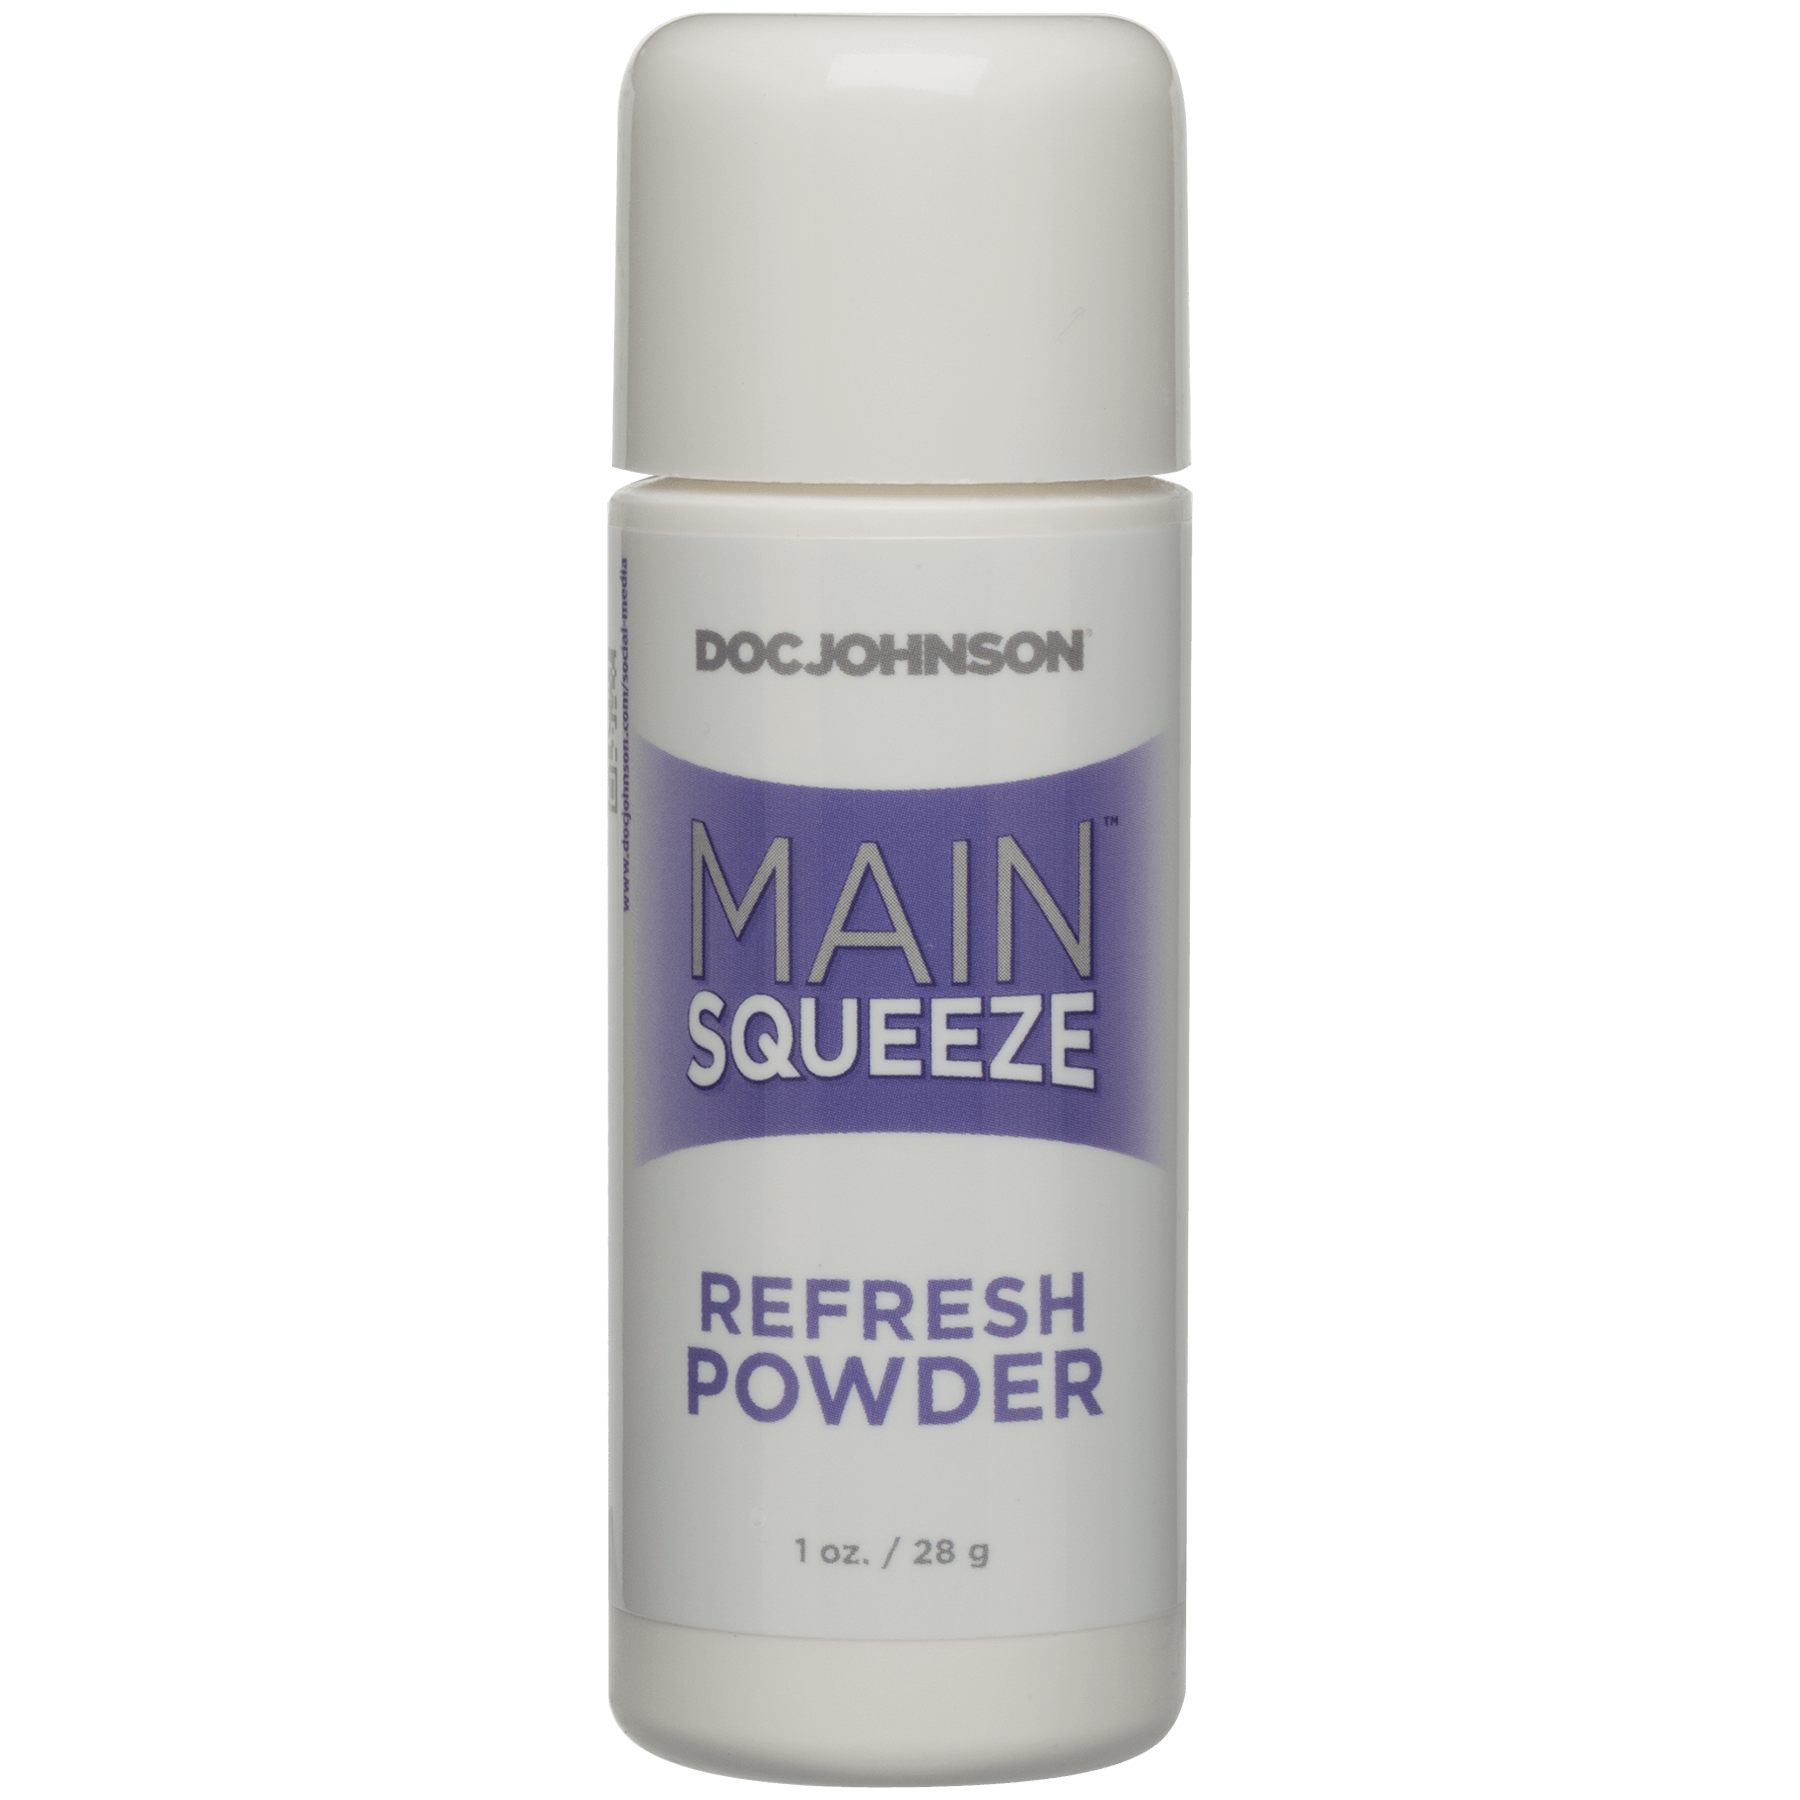 Doc Johnson Main Squeeze Refresh Powder - Buy At Luxury Toy X - Free 3-Day Shipping